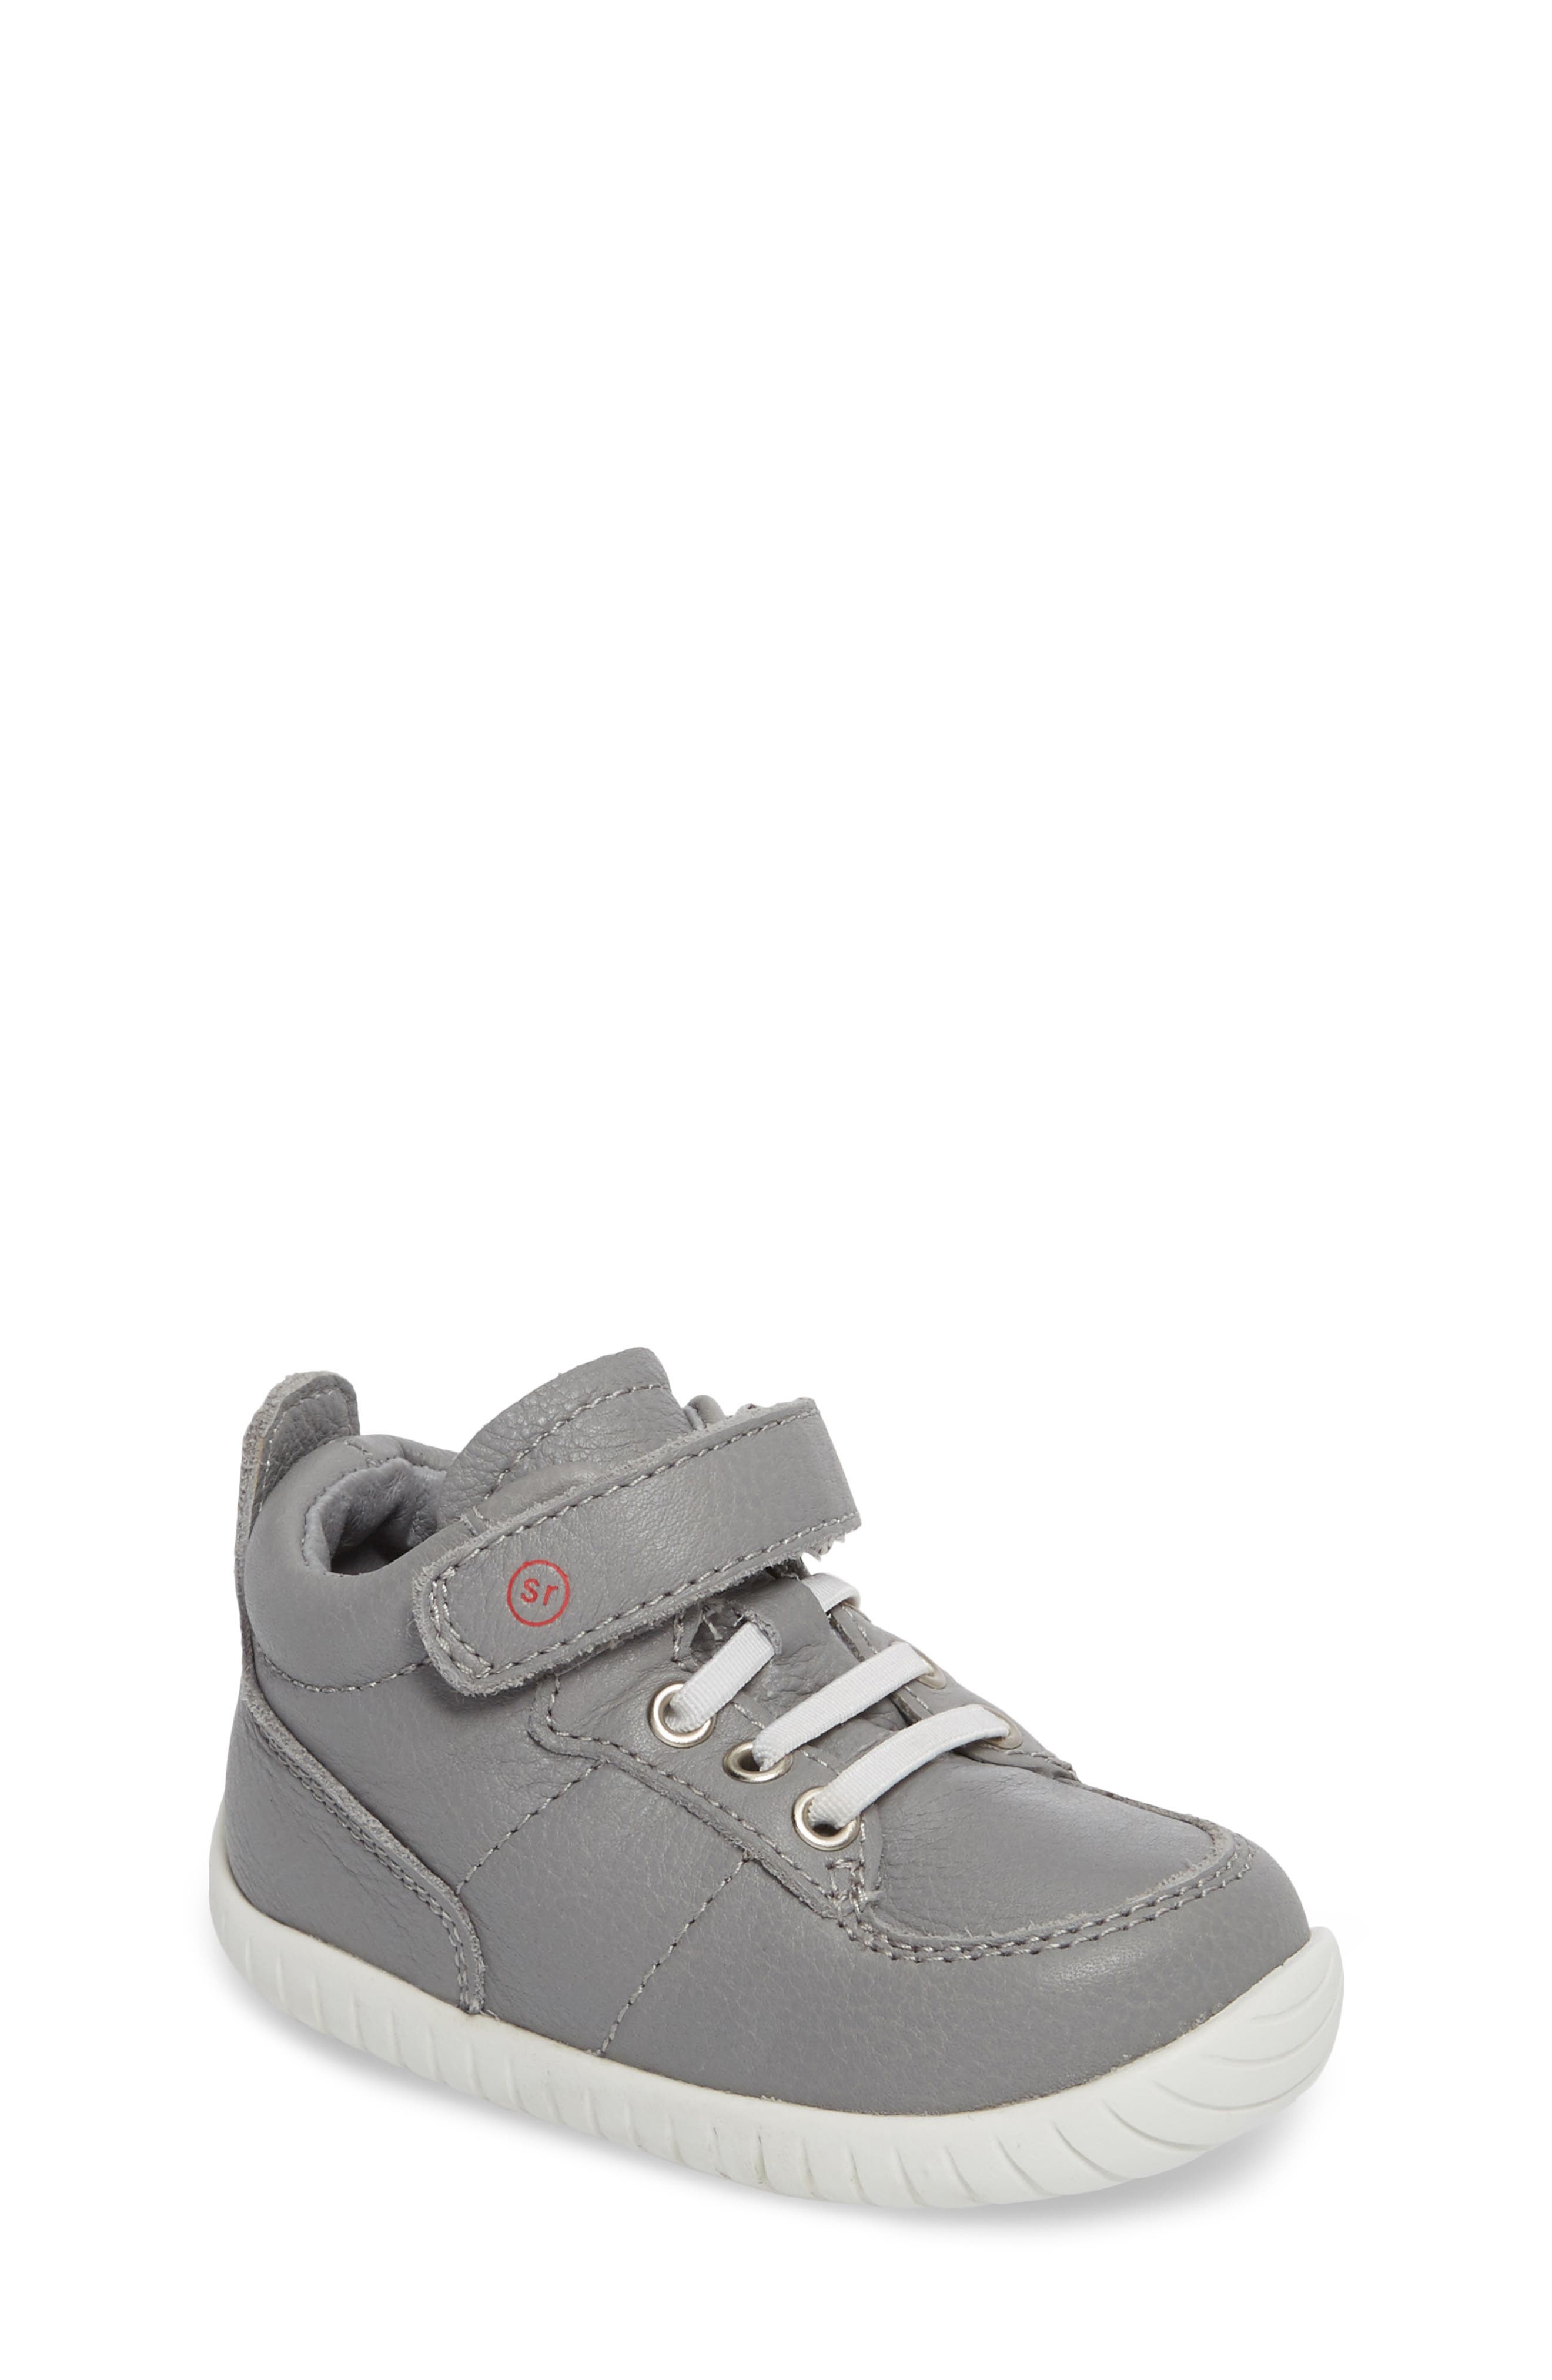 stride rite white high top shoes